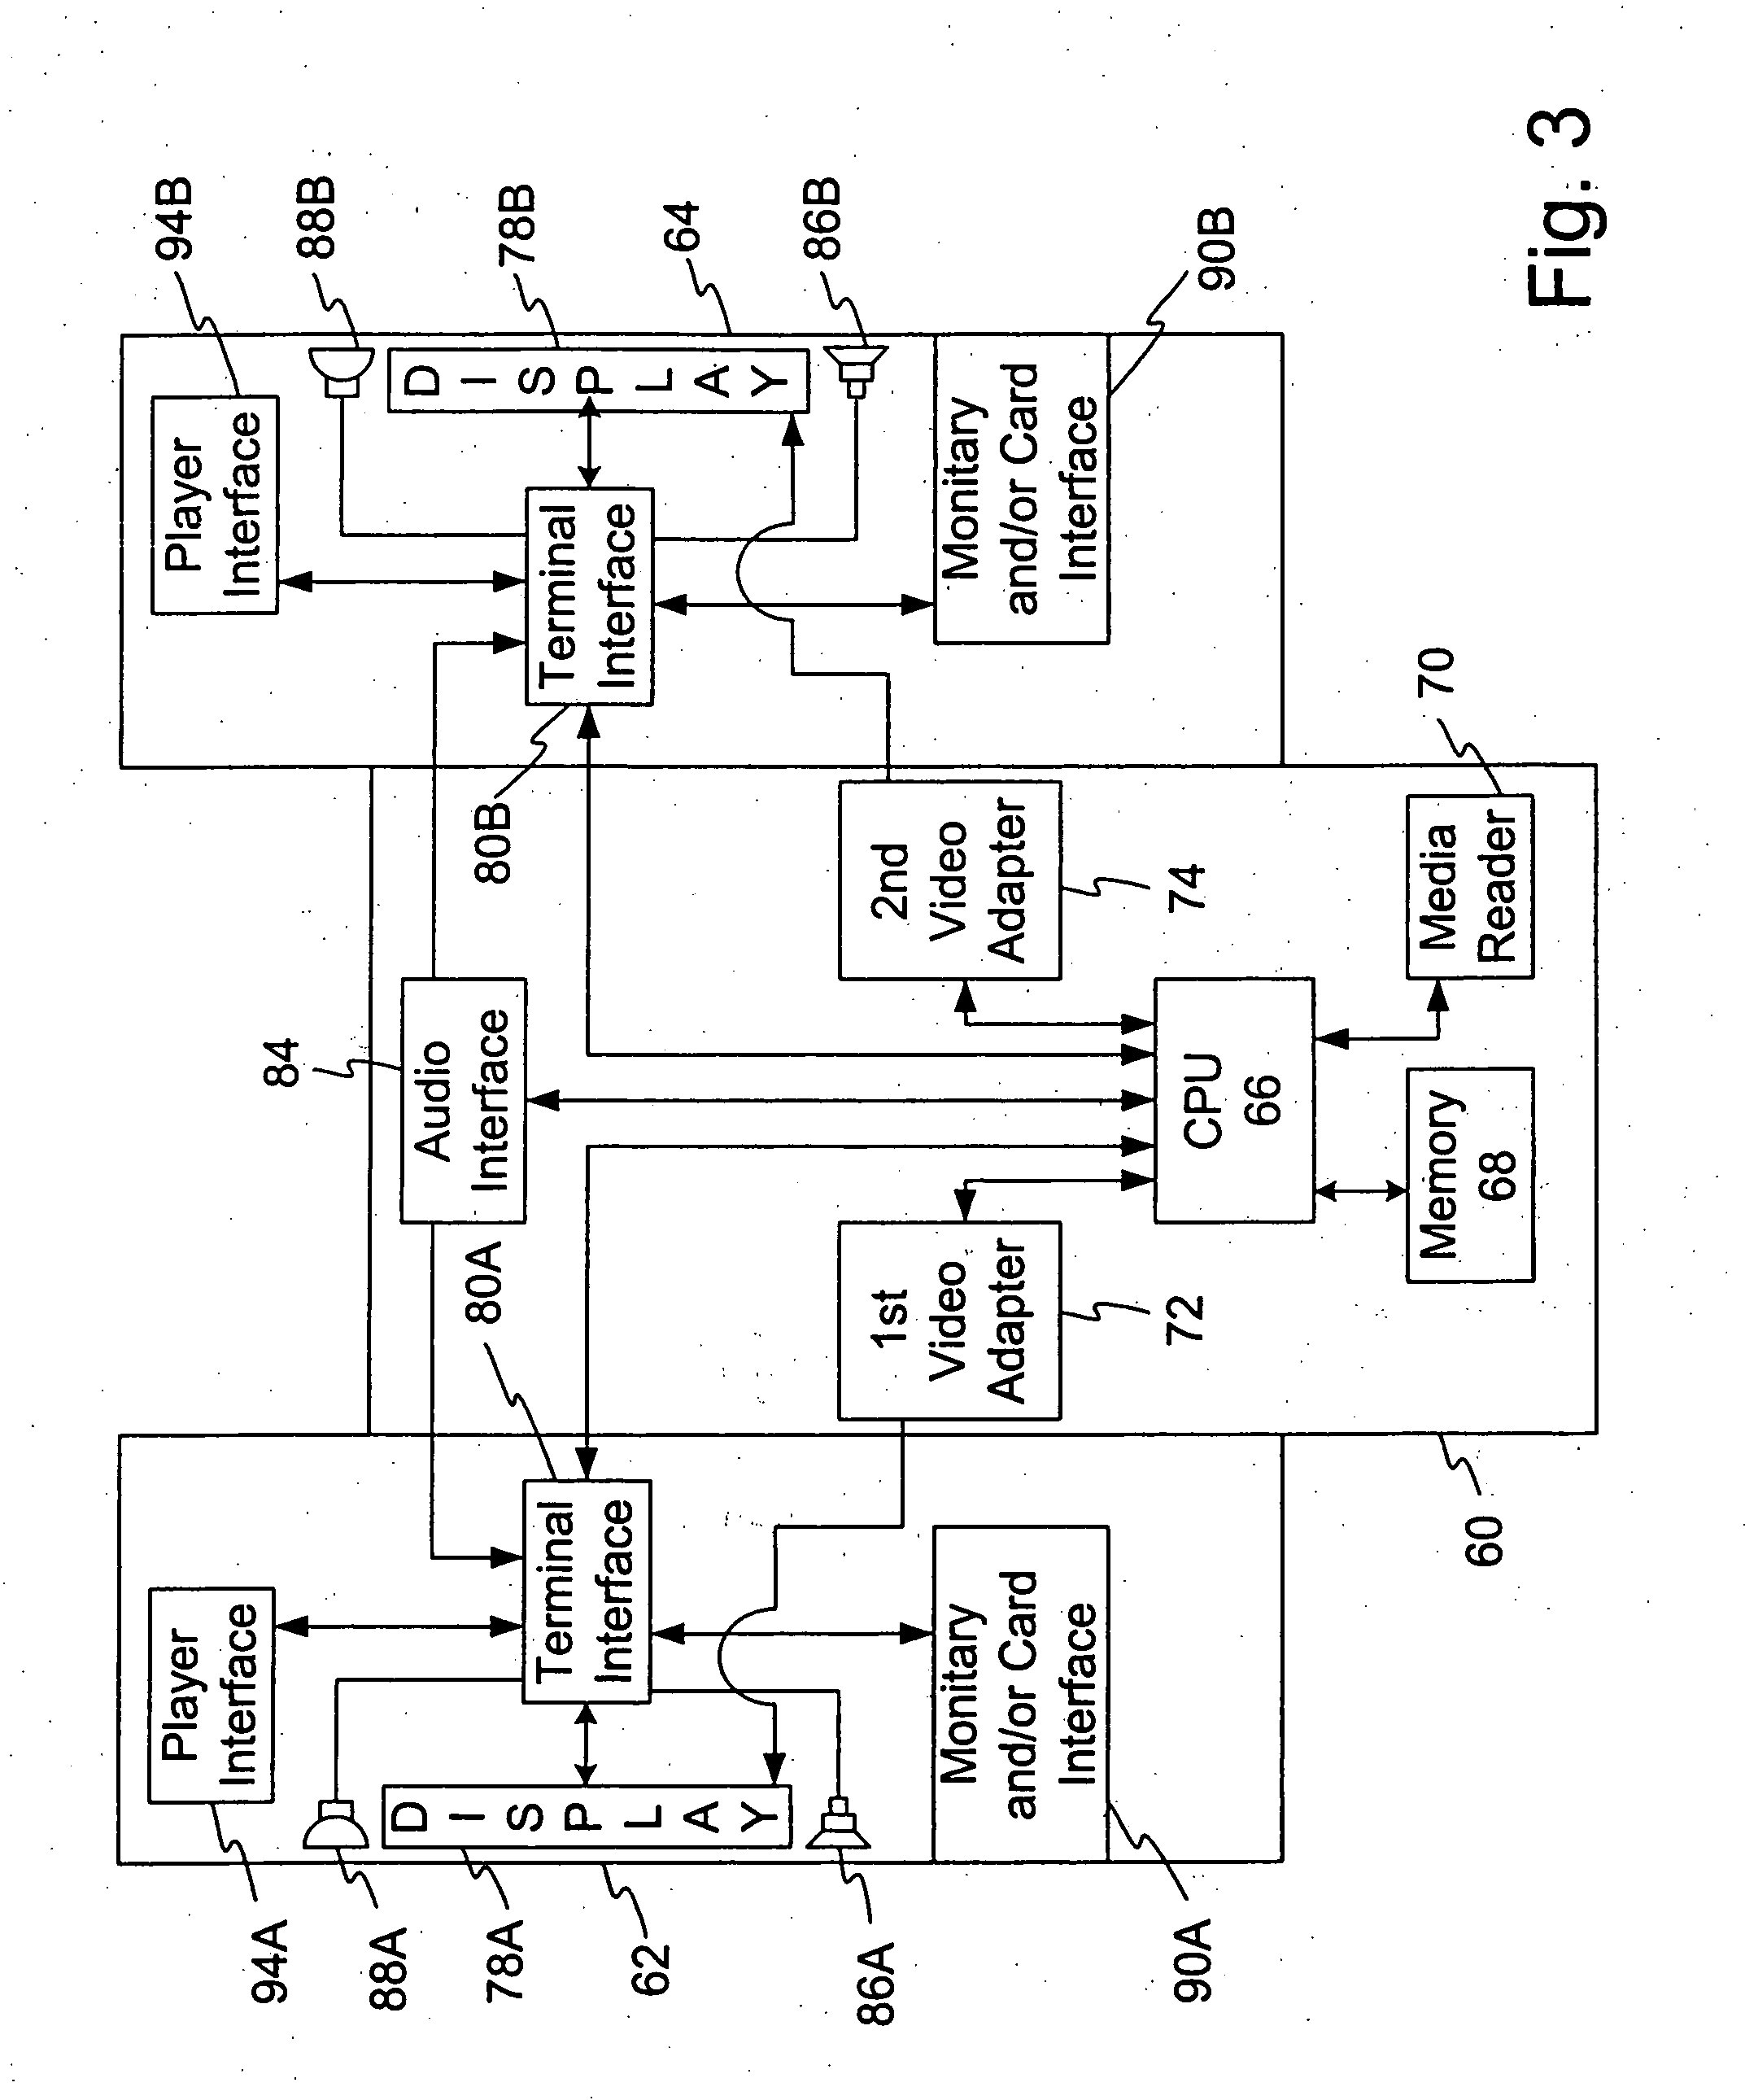 Method and apparatus for controlling multiple games with one or more processors